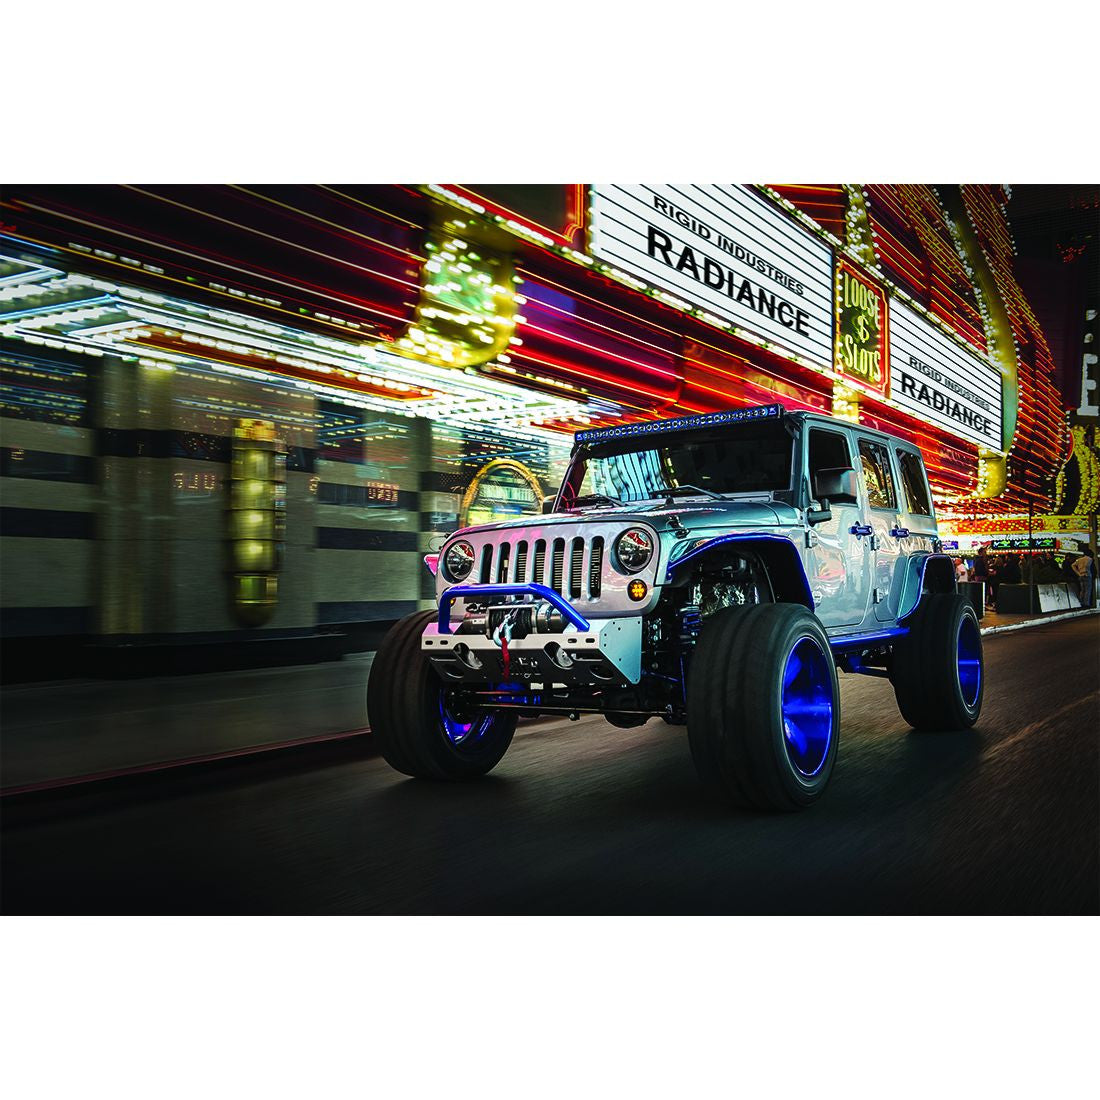 RIGID Industries Radiance Plus LED Light Bar, Broad-Spot Optic, 20 Inch With Red Backlight